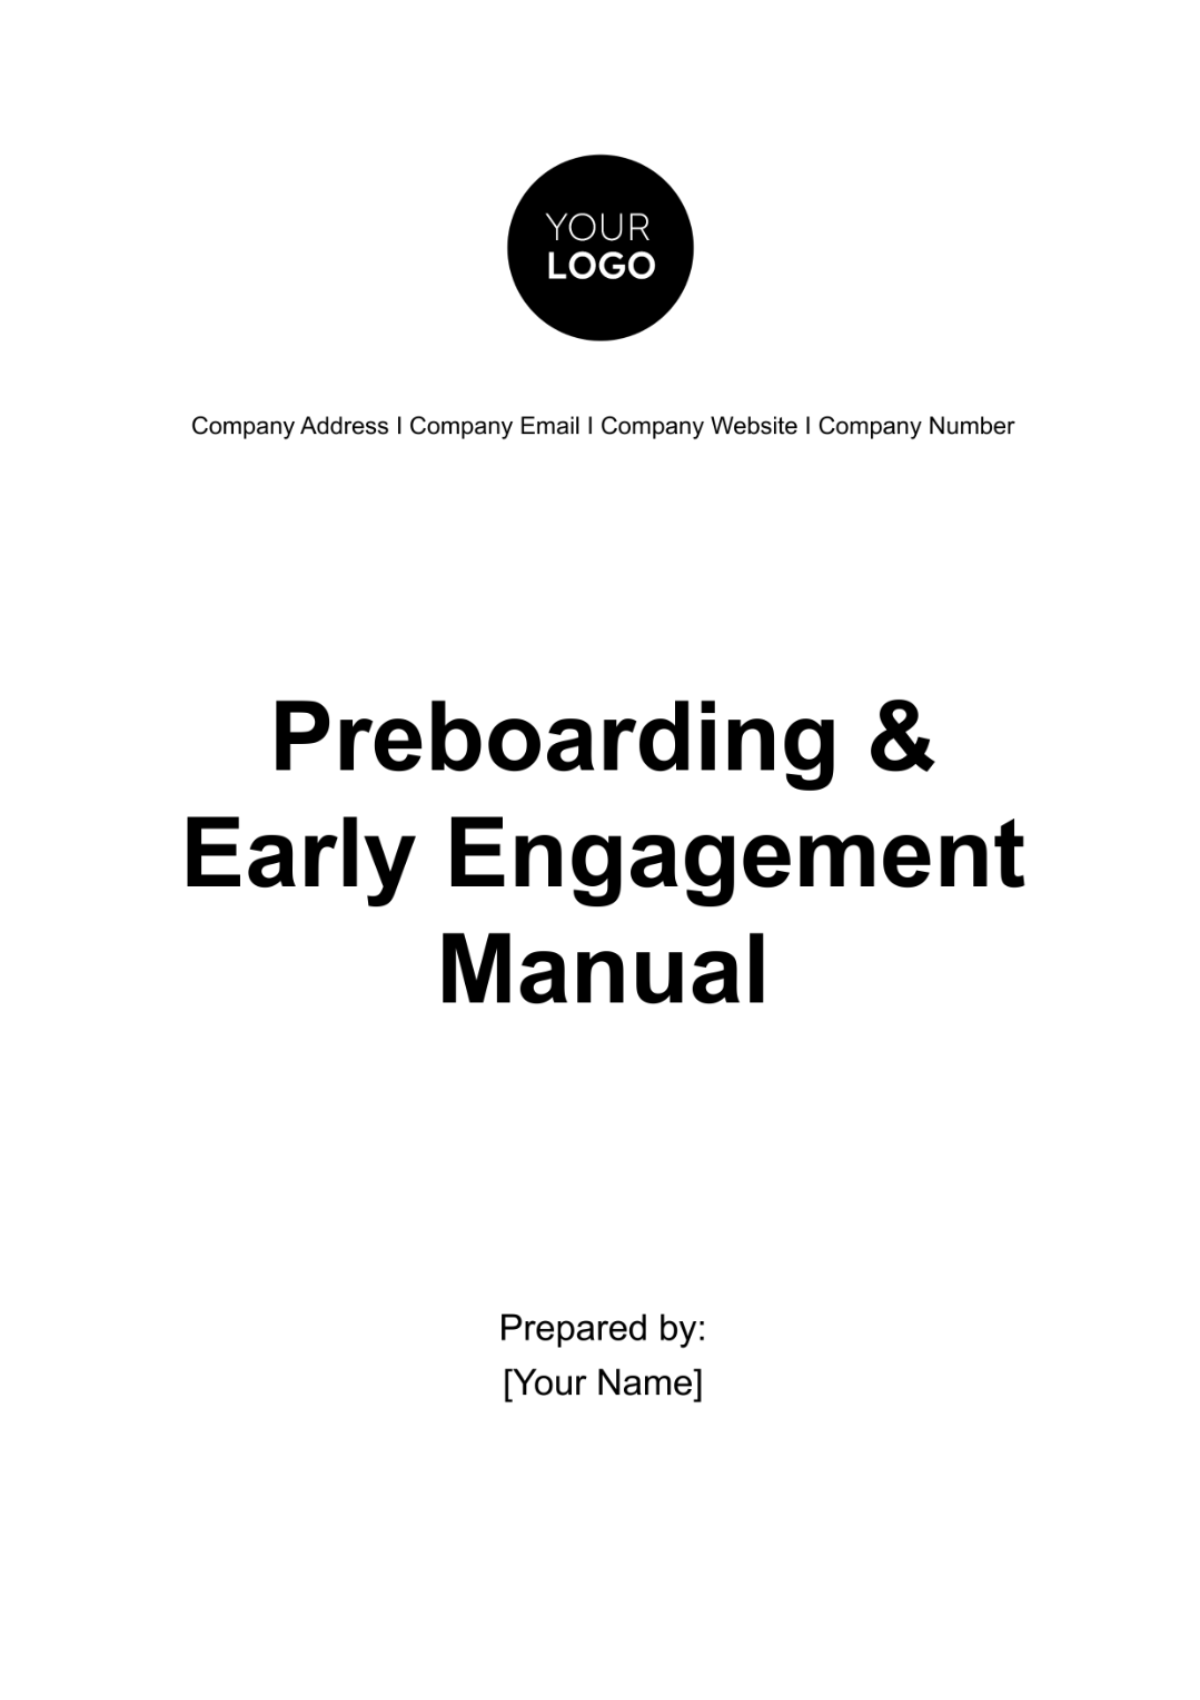 Free Preboarding & Early Engagement Manual HR Template